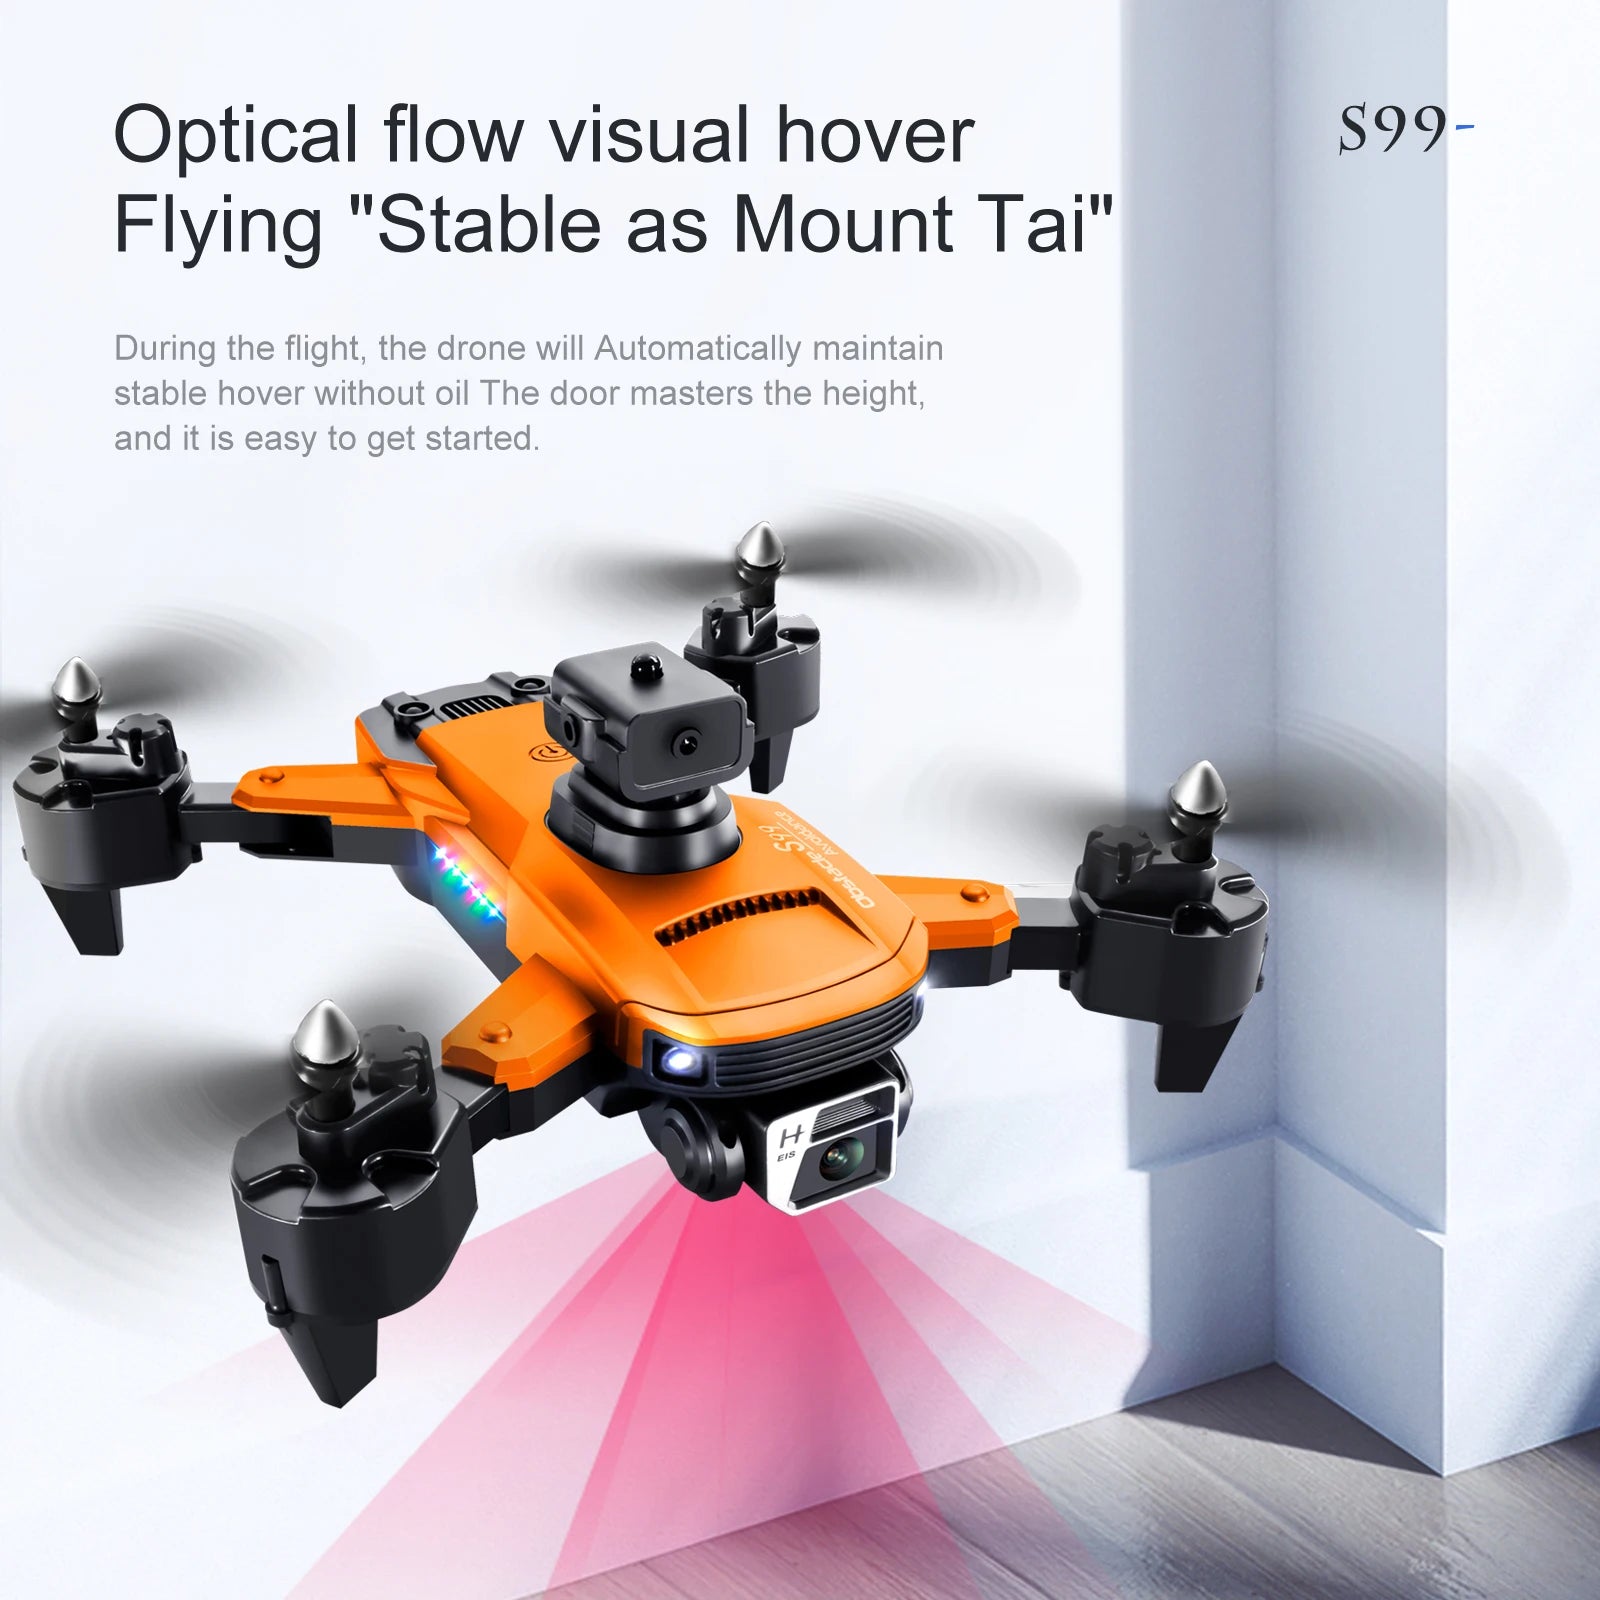 S99 Drone, the drone will automatically maintain stable hover without oil the door masters the